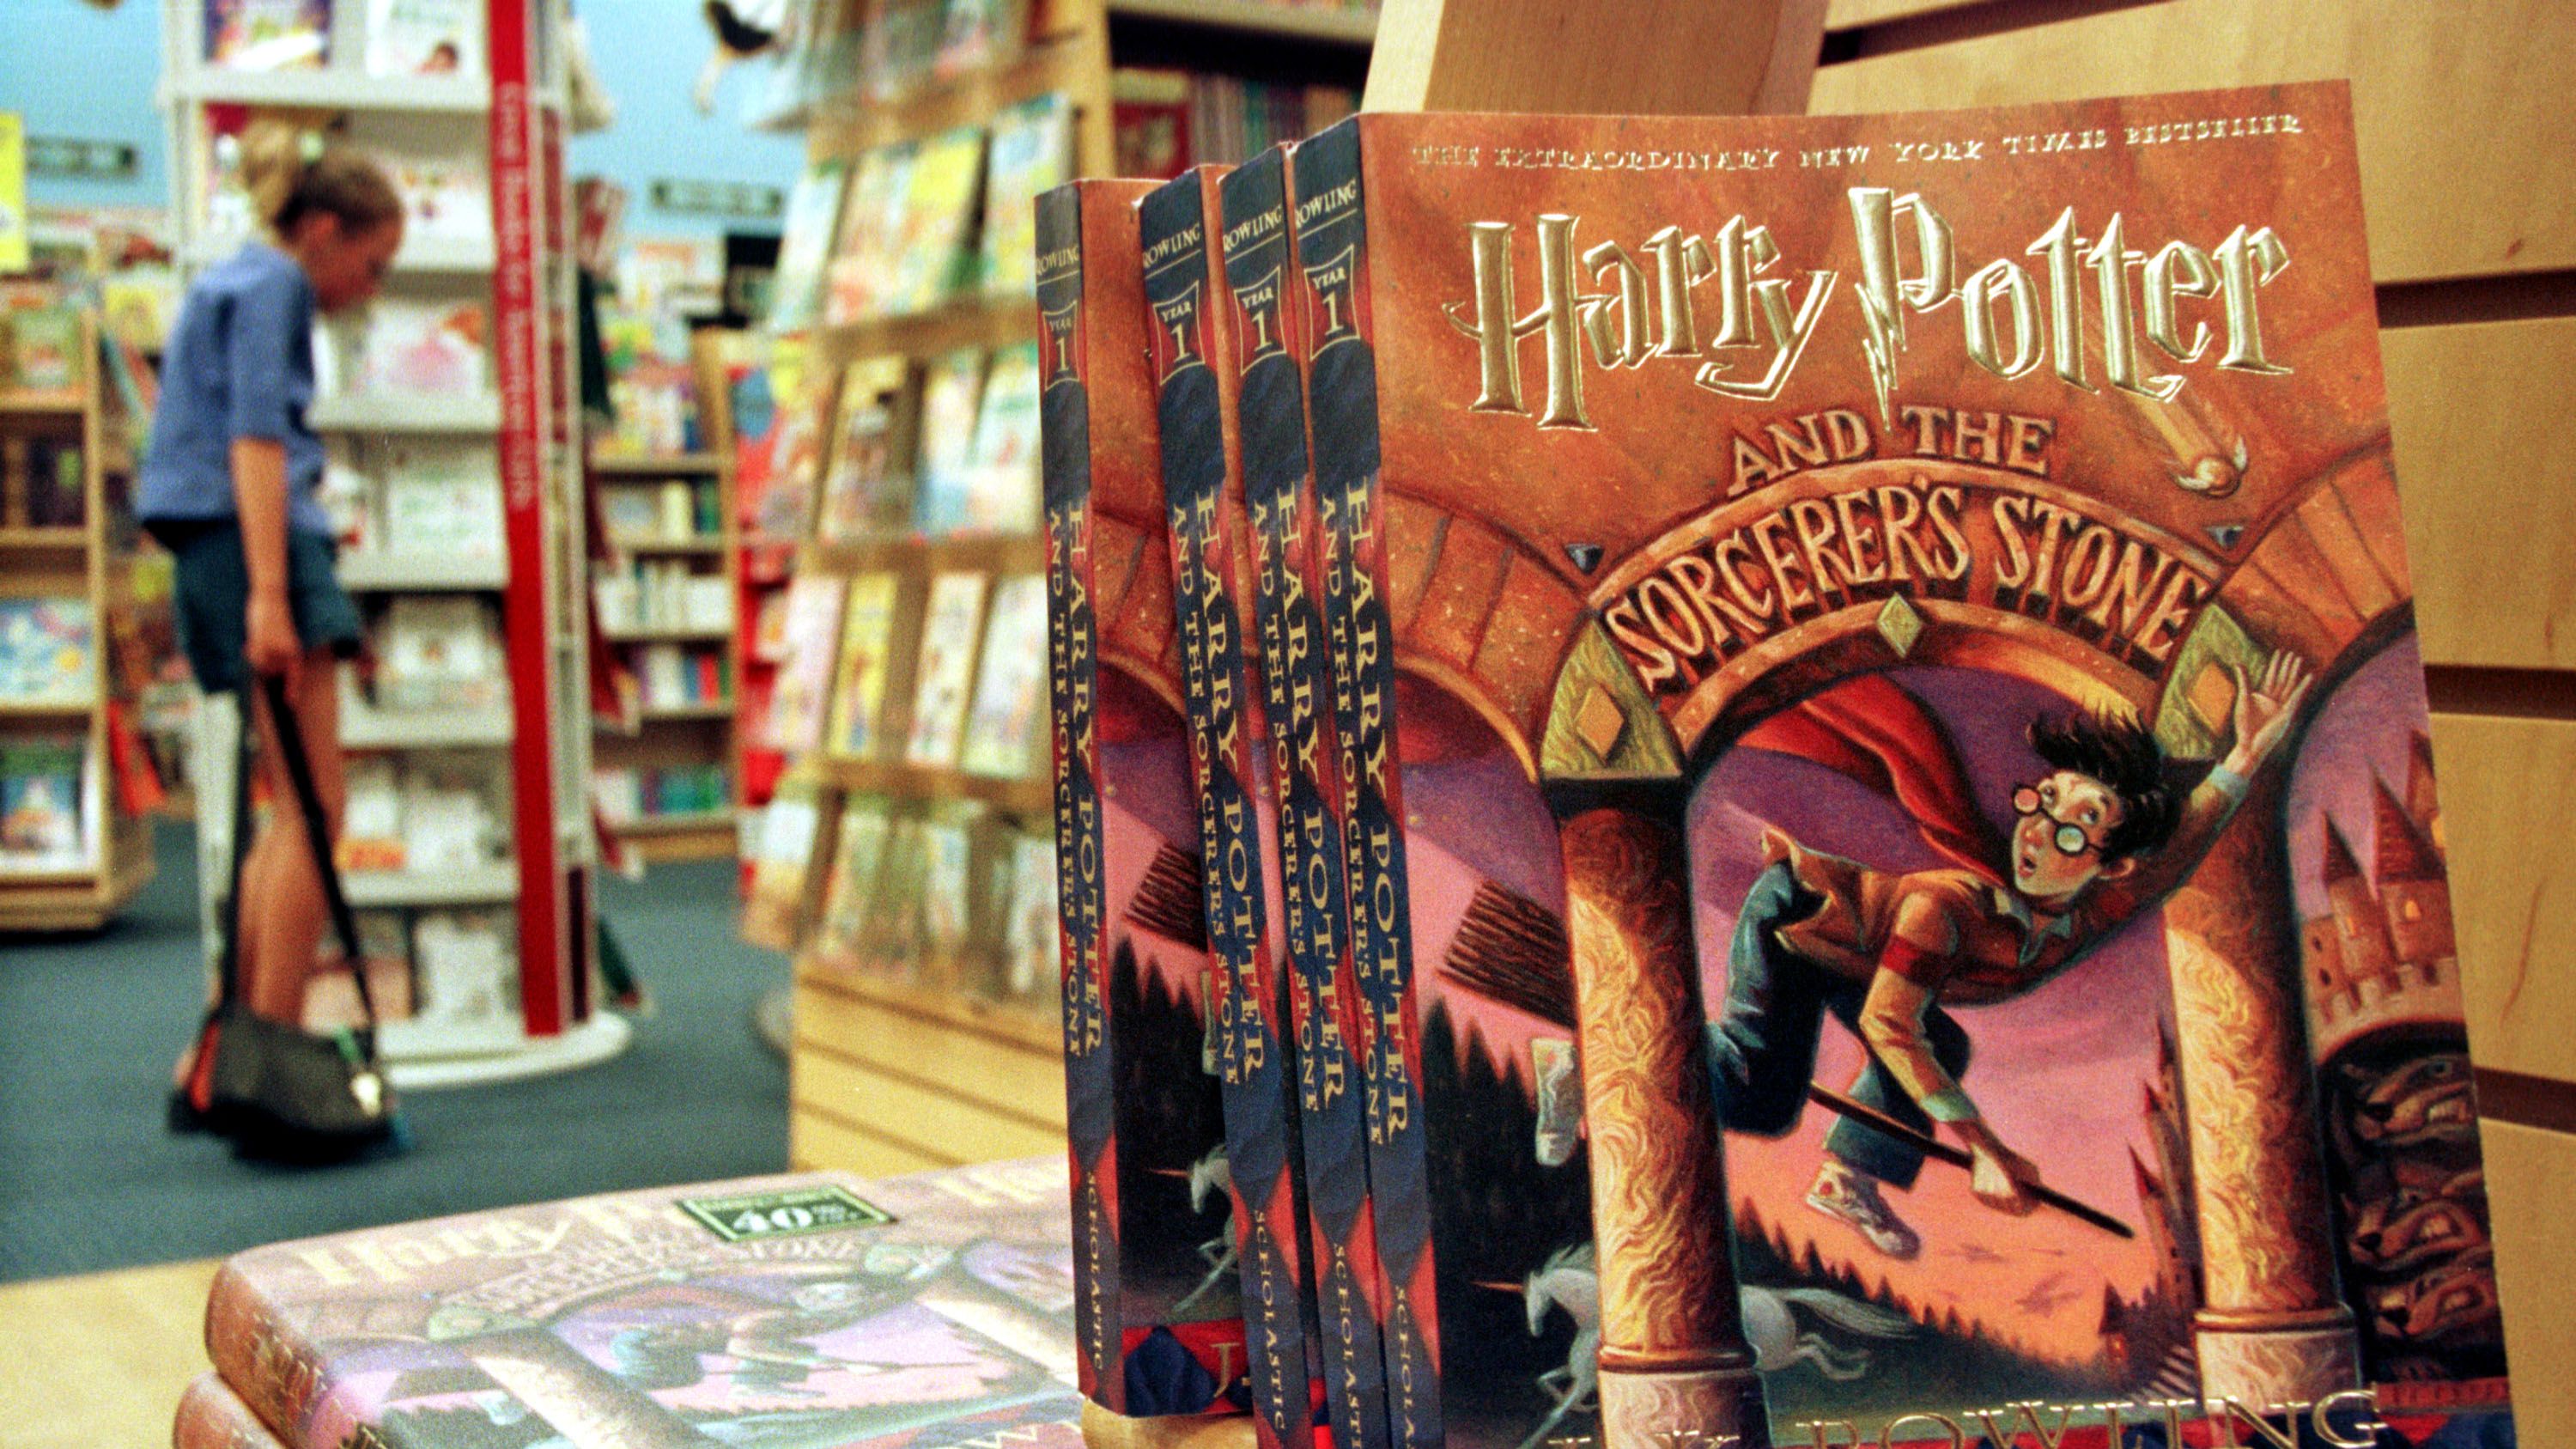 JK Rowling May Produce a Harry Potter TV Series Reboot for HBO Max